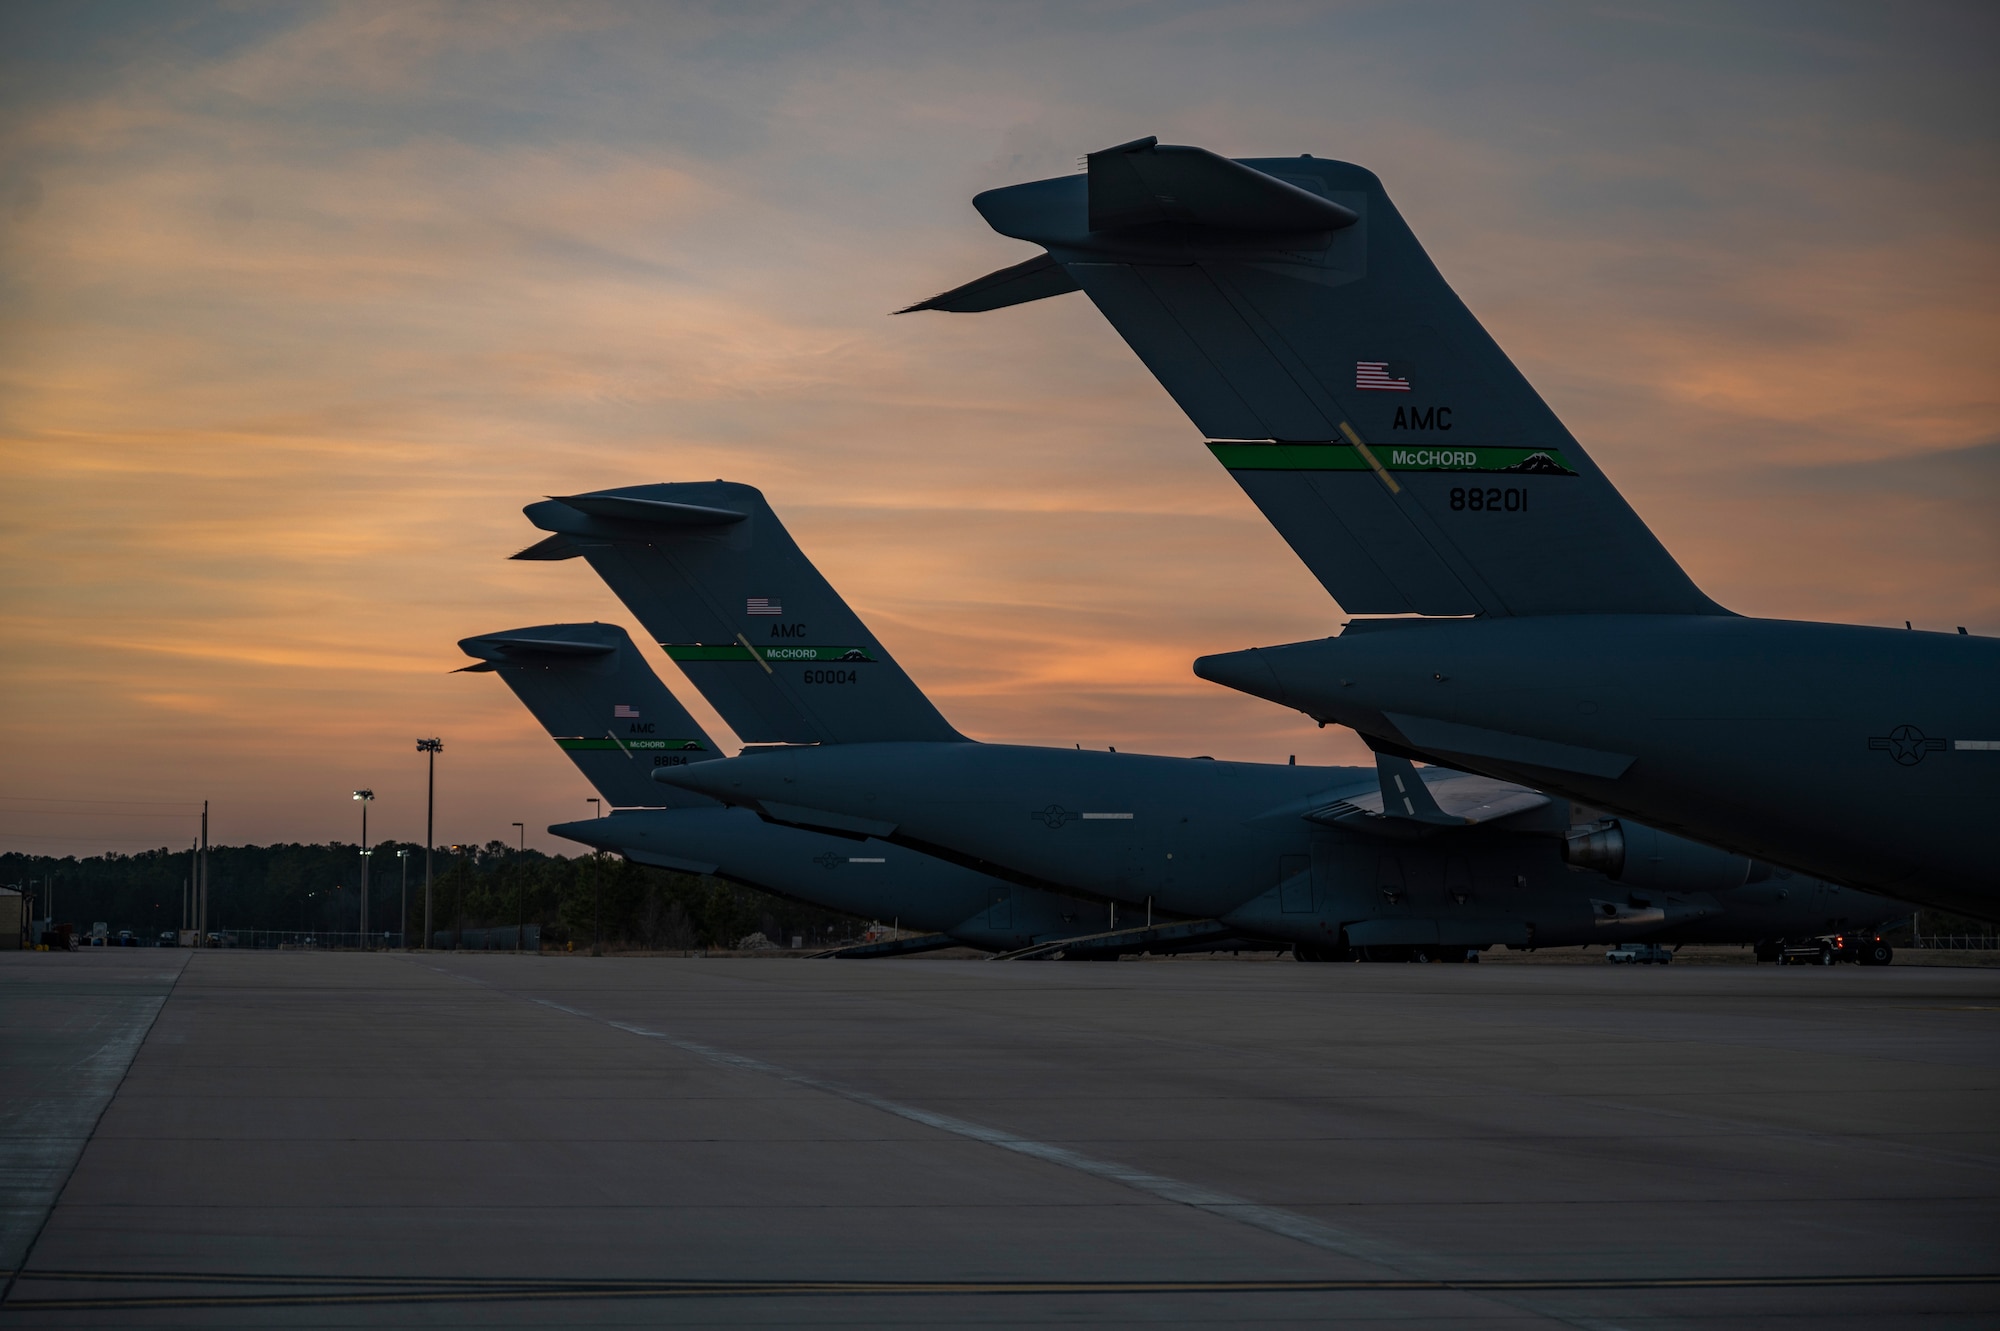 Three C-17 Globemaster IIIs assigned to Joint Base Lewis-McChord, Washington, sit on a flightline at Pope Army Airfield, North Carolina, Jan. 31, 2022. The C-17 aircrew are conducting operations for Battalion Mass Tactical Week, which is a joint exercise designed to enhance participants’ abilities by practicing scenarios in a controlled environment. (U.S. Air Force photo by Airman 1st Class Charles Casner)